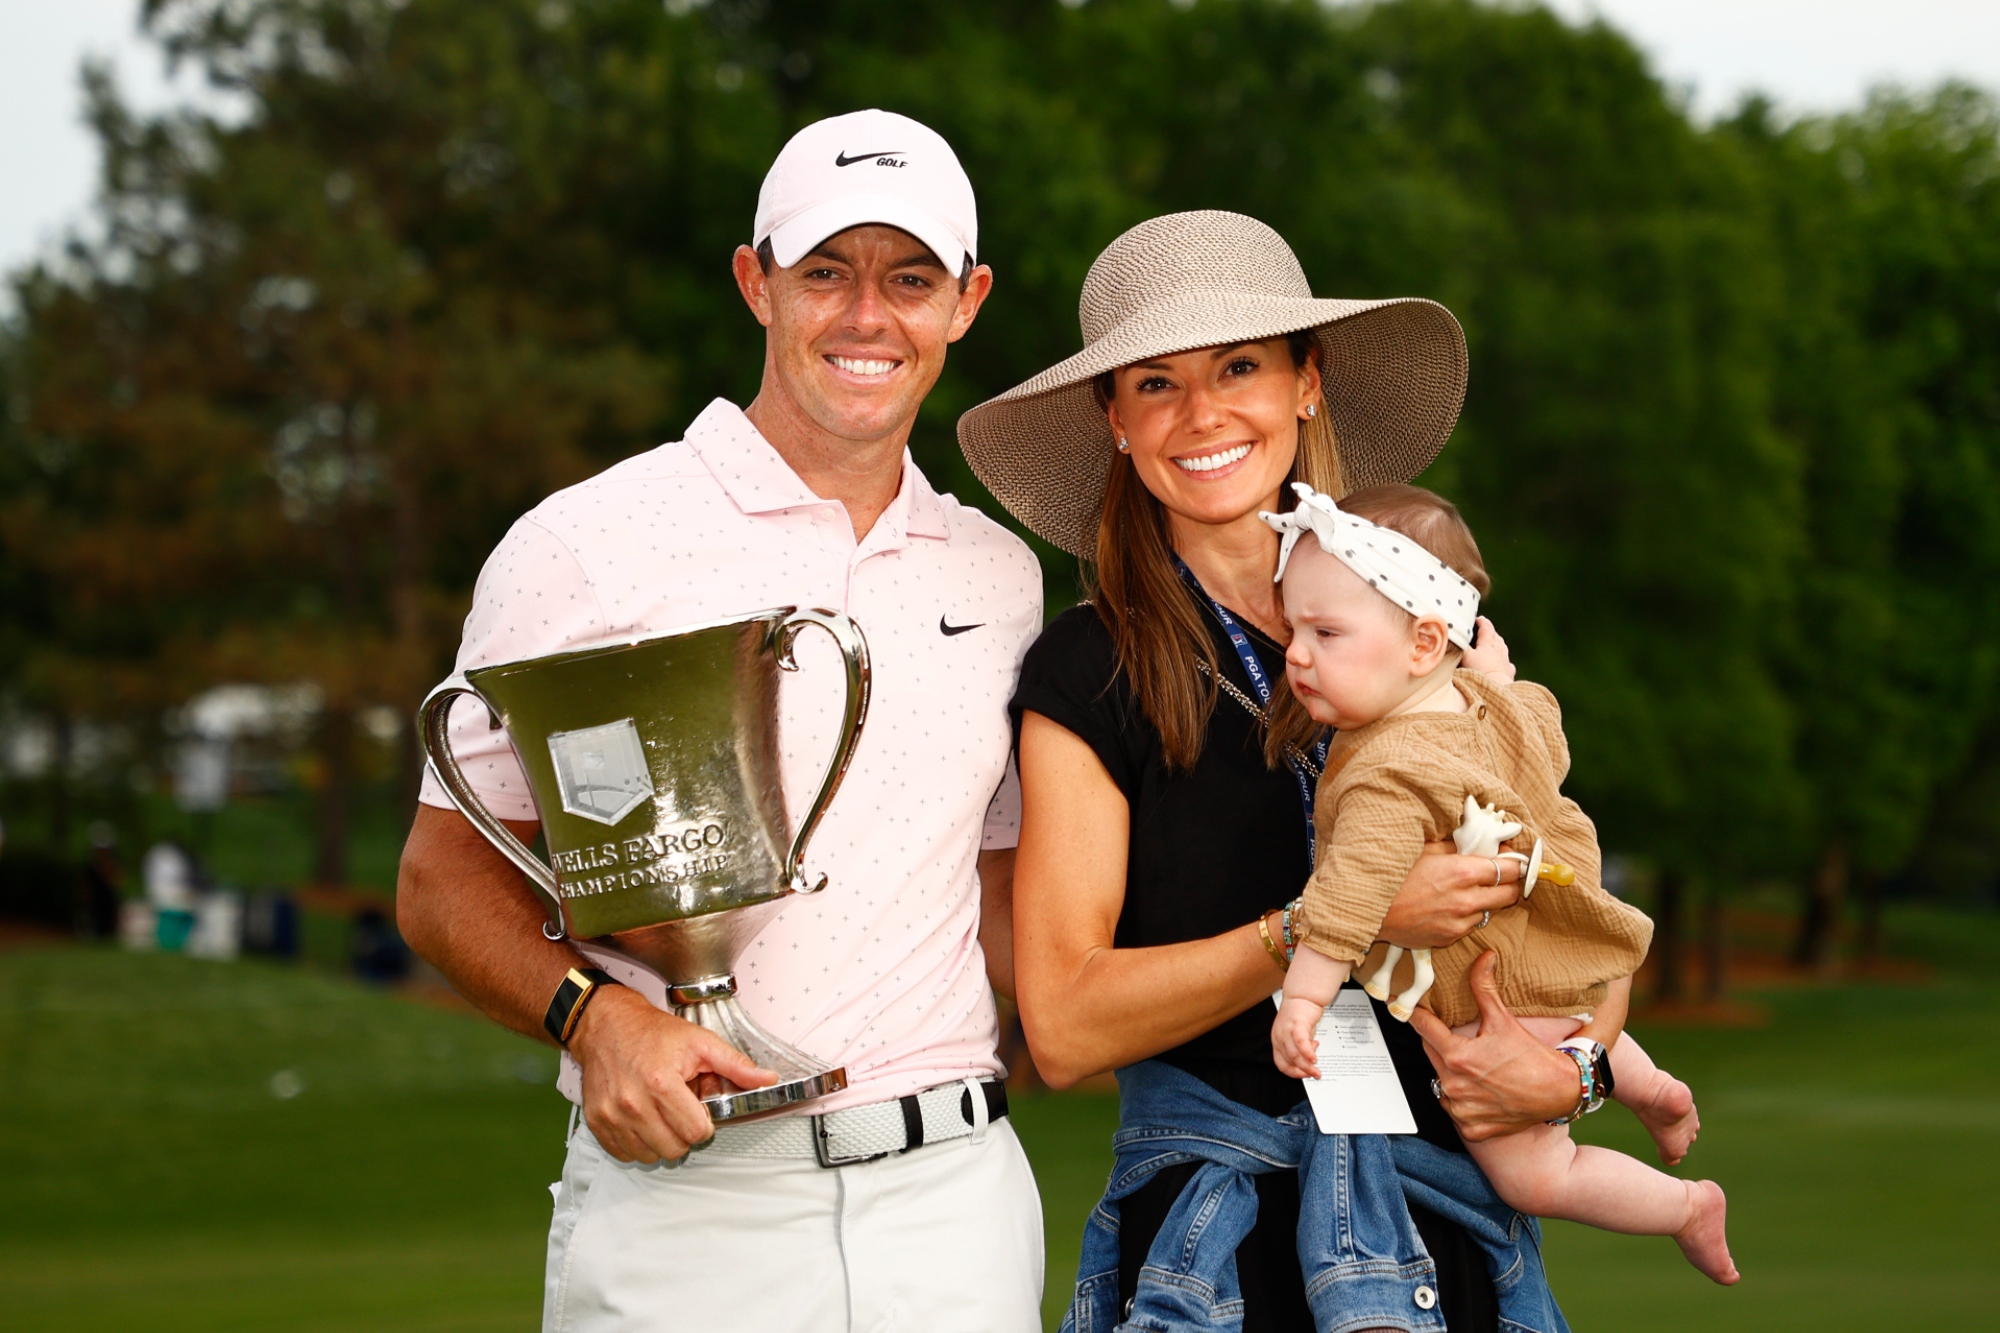 Who is Rory McIlroy's wife? Meet Erica Stoll